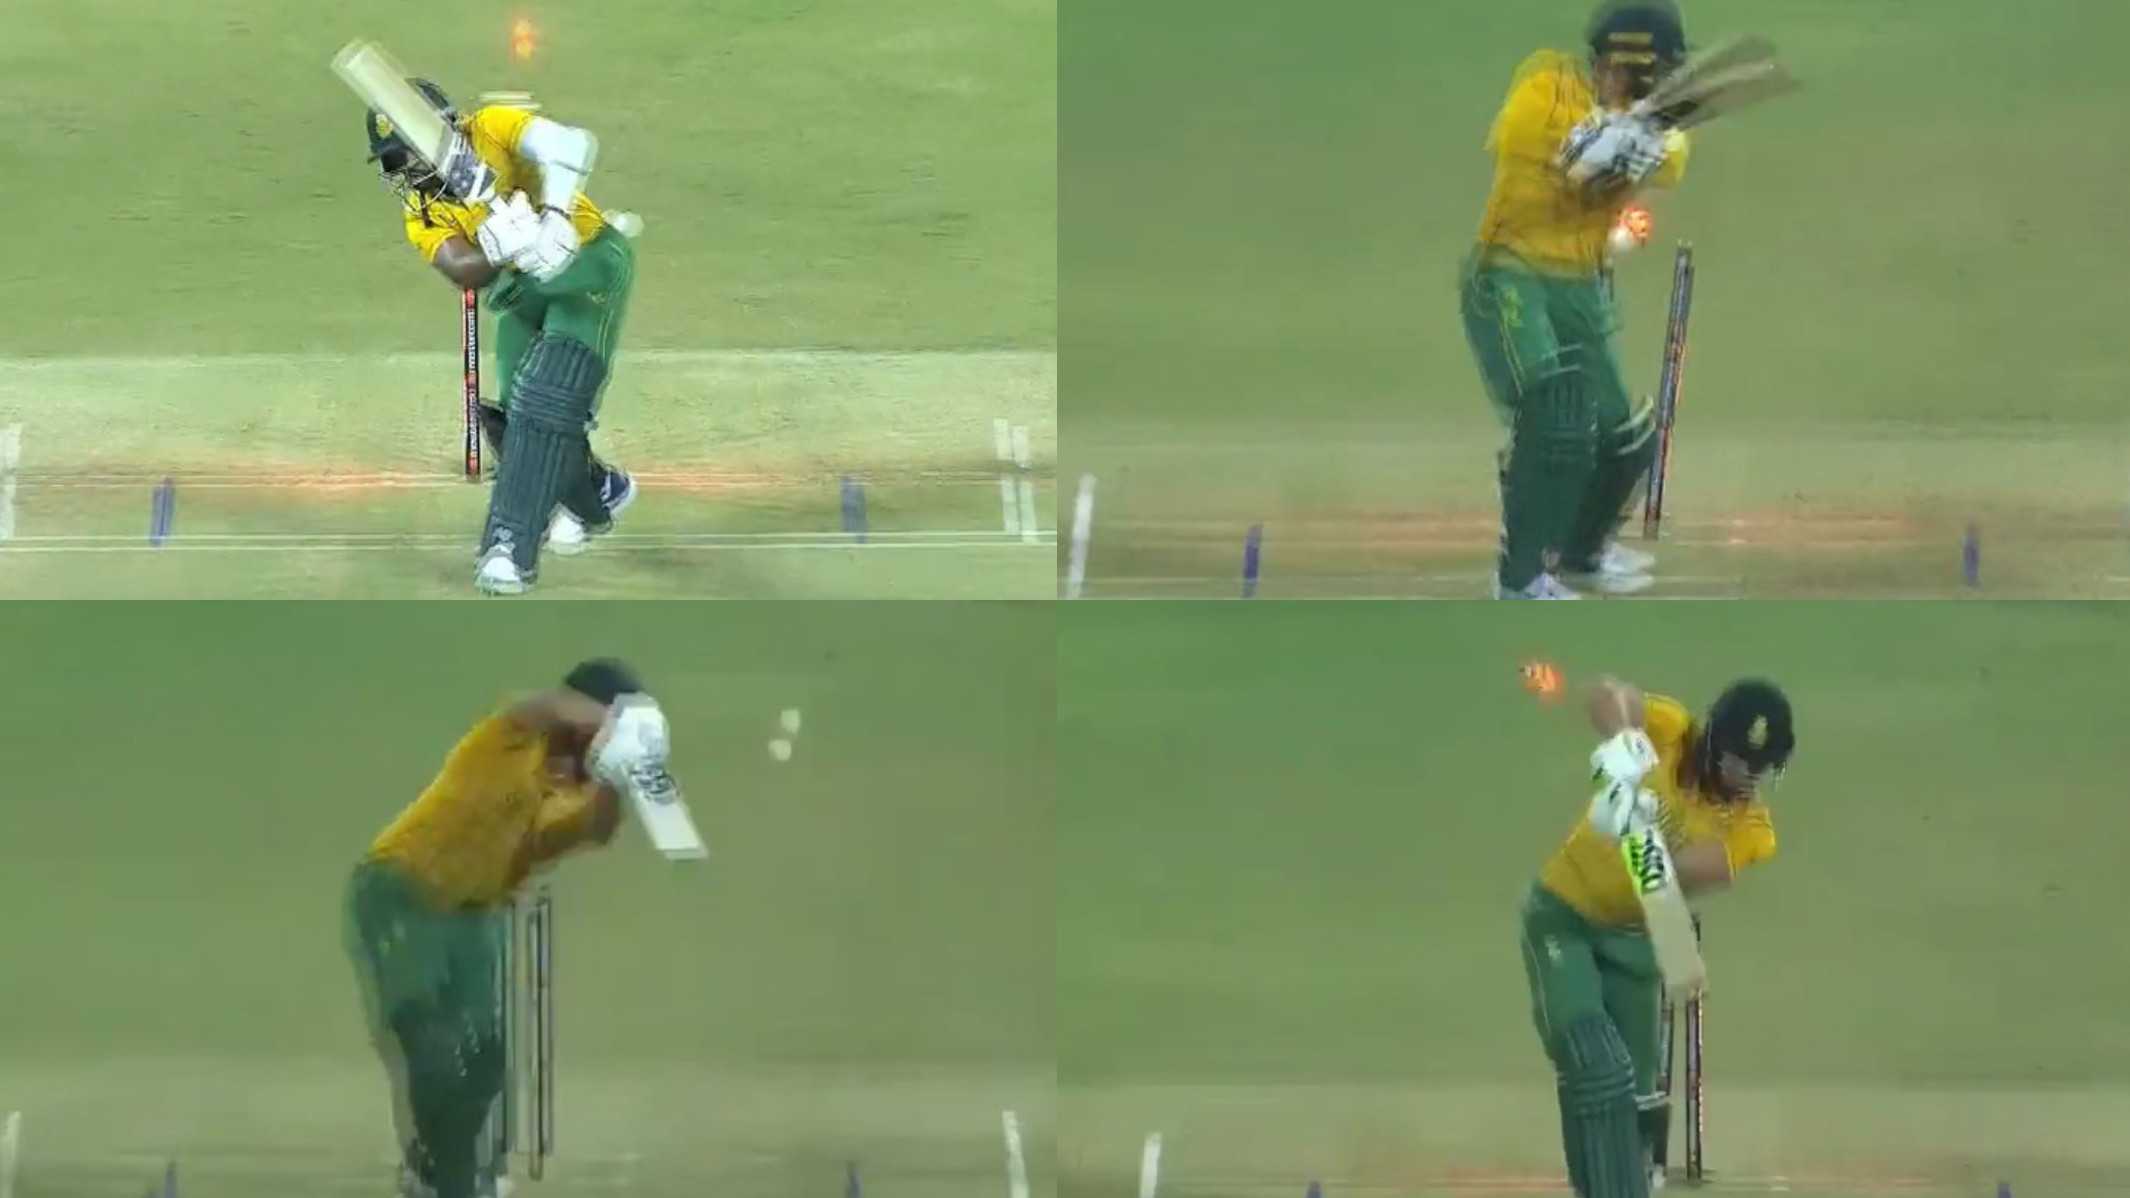 IND v SA 2022: WATCH- Arshdeep Singh and Deepak Chahar reduce South Africa to 9/5 in 2.3 overs in 1st T20I